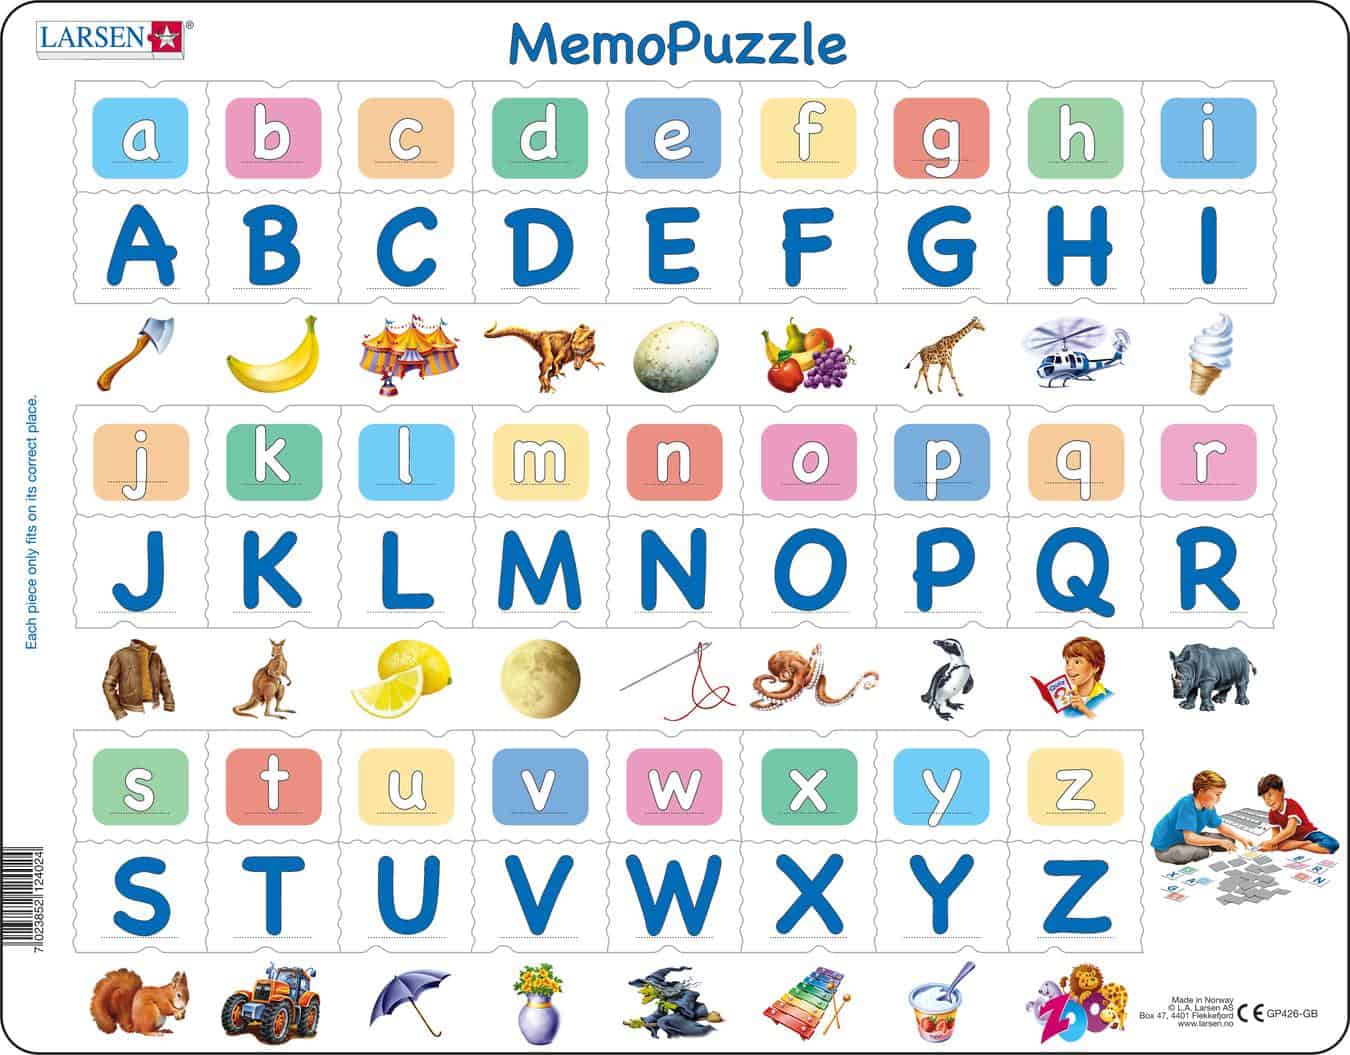 maxi-puzzle-alphabet-26-upper-and-lower-case-letters-english-larsen-sustainable